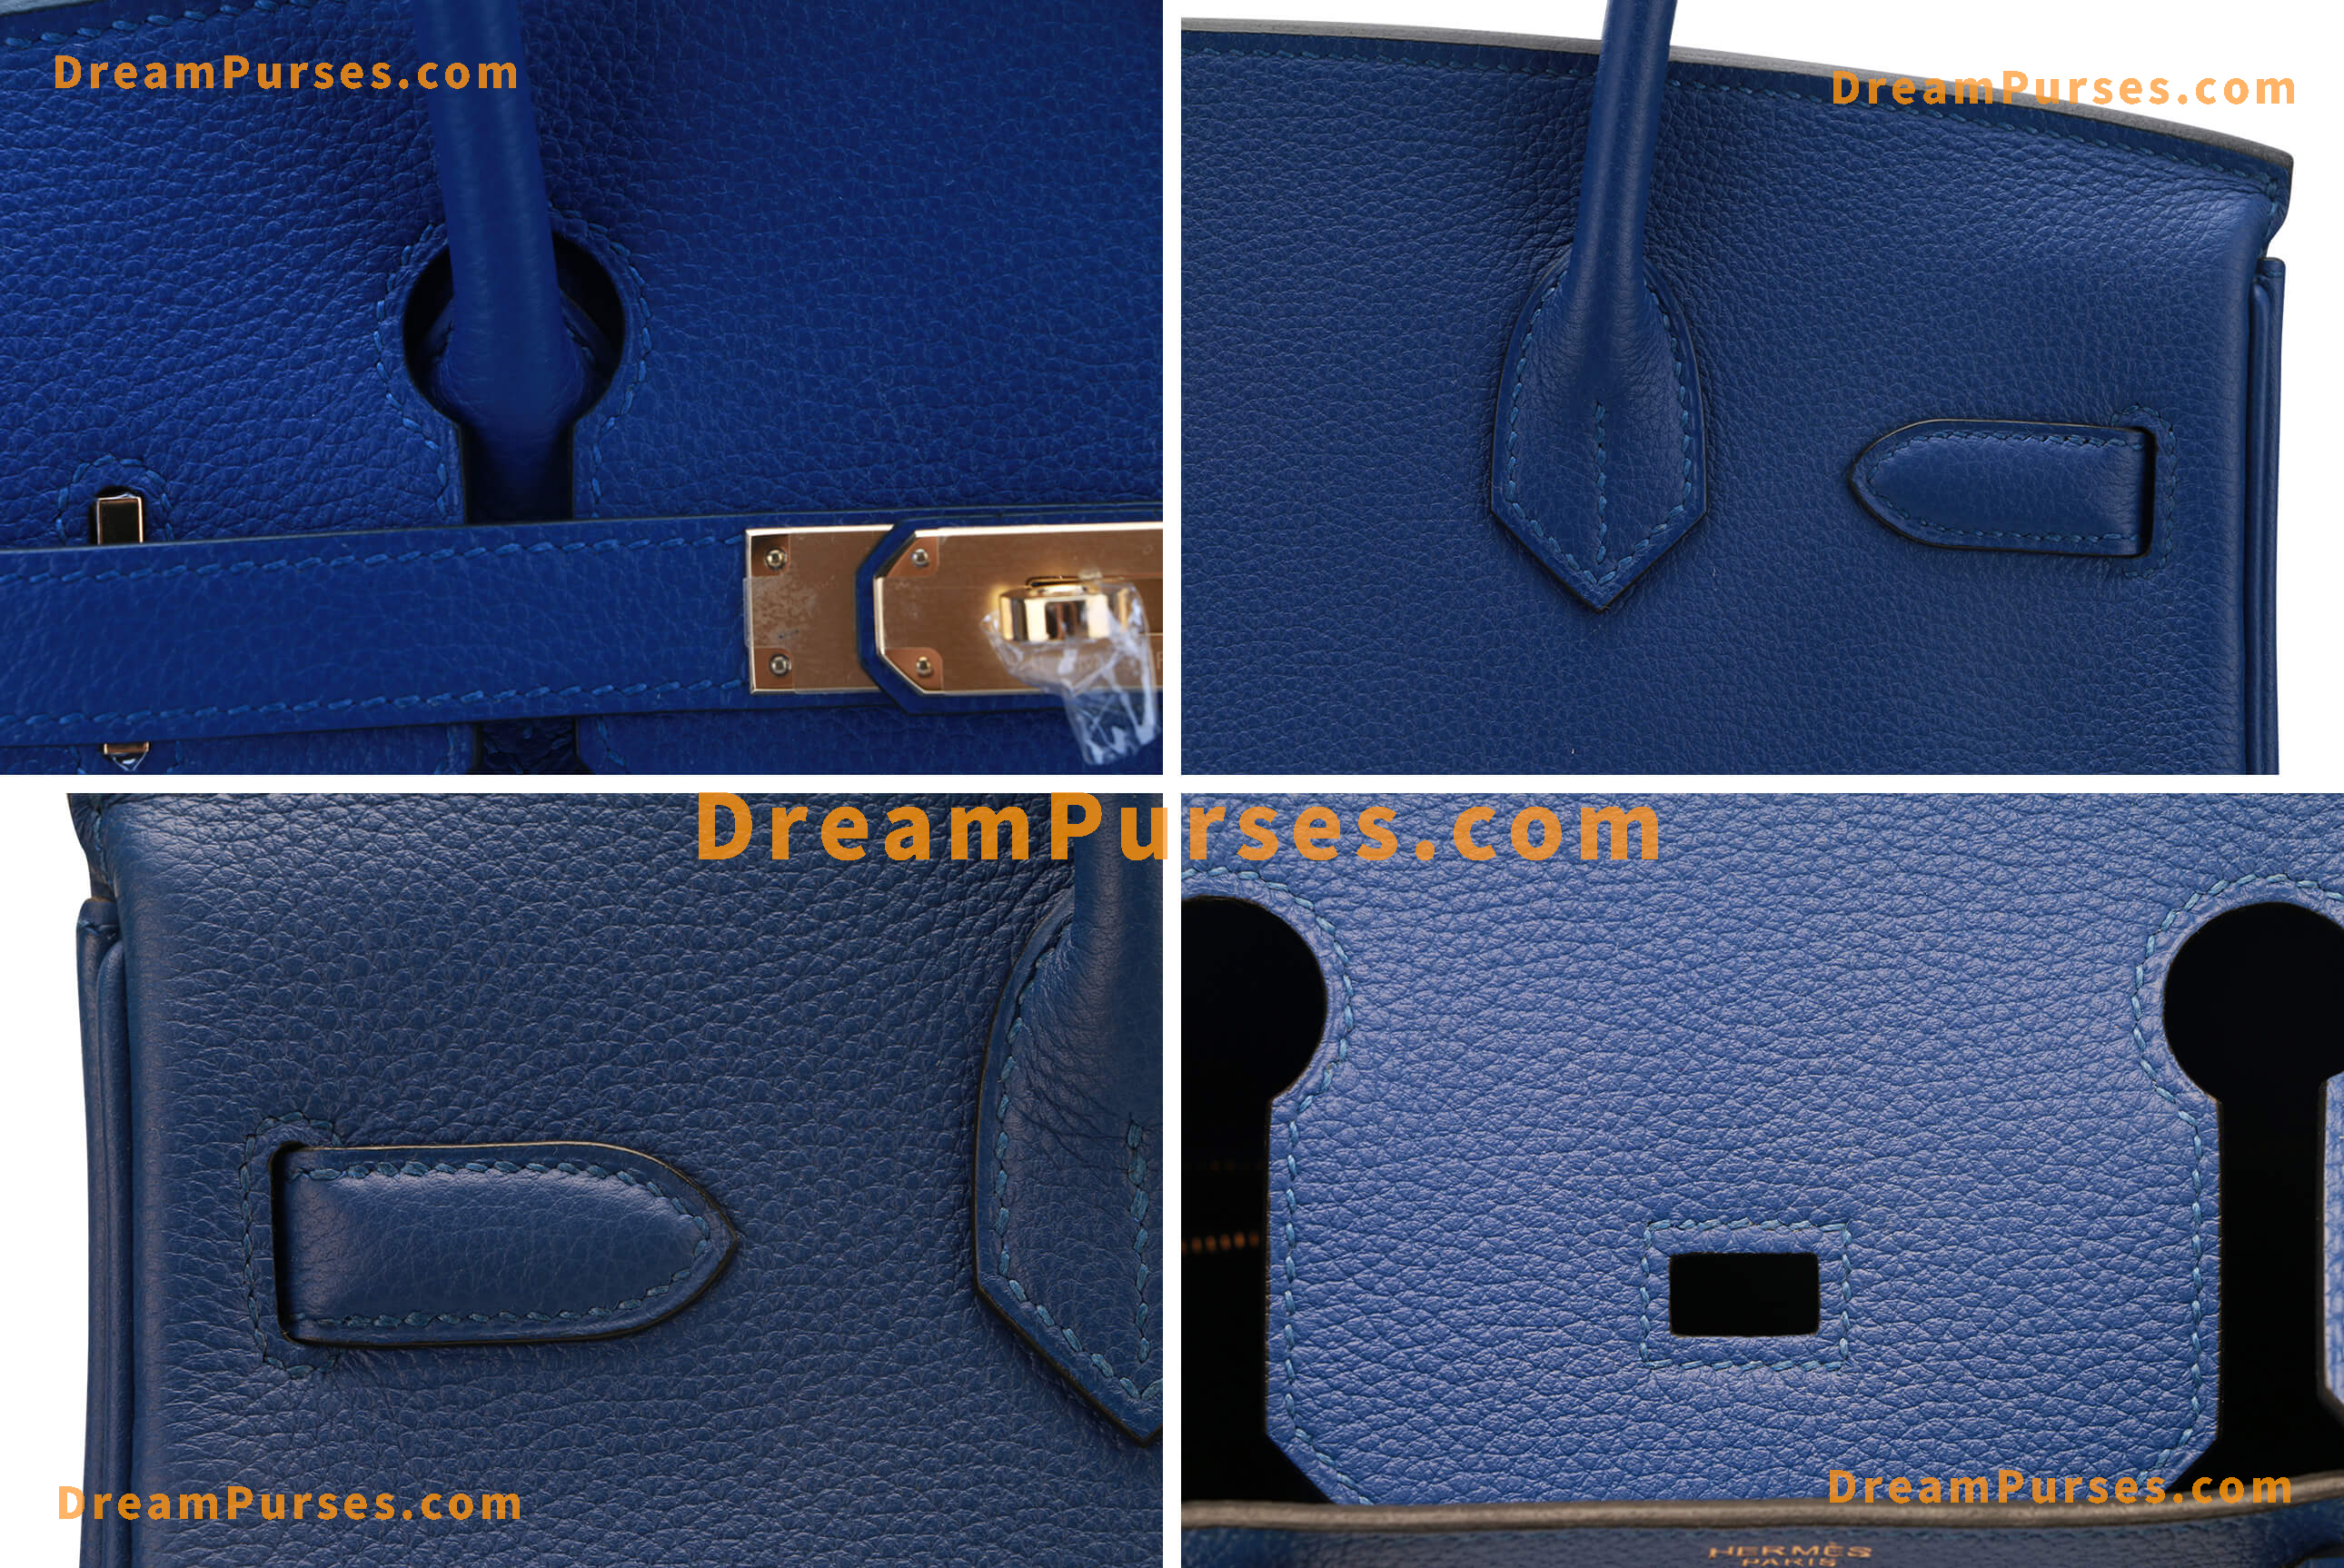 What is the difference between genuine Hermes bags and fake bags? - Quora